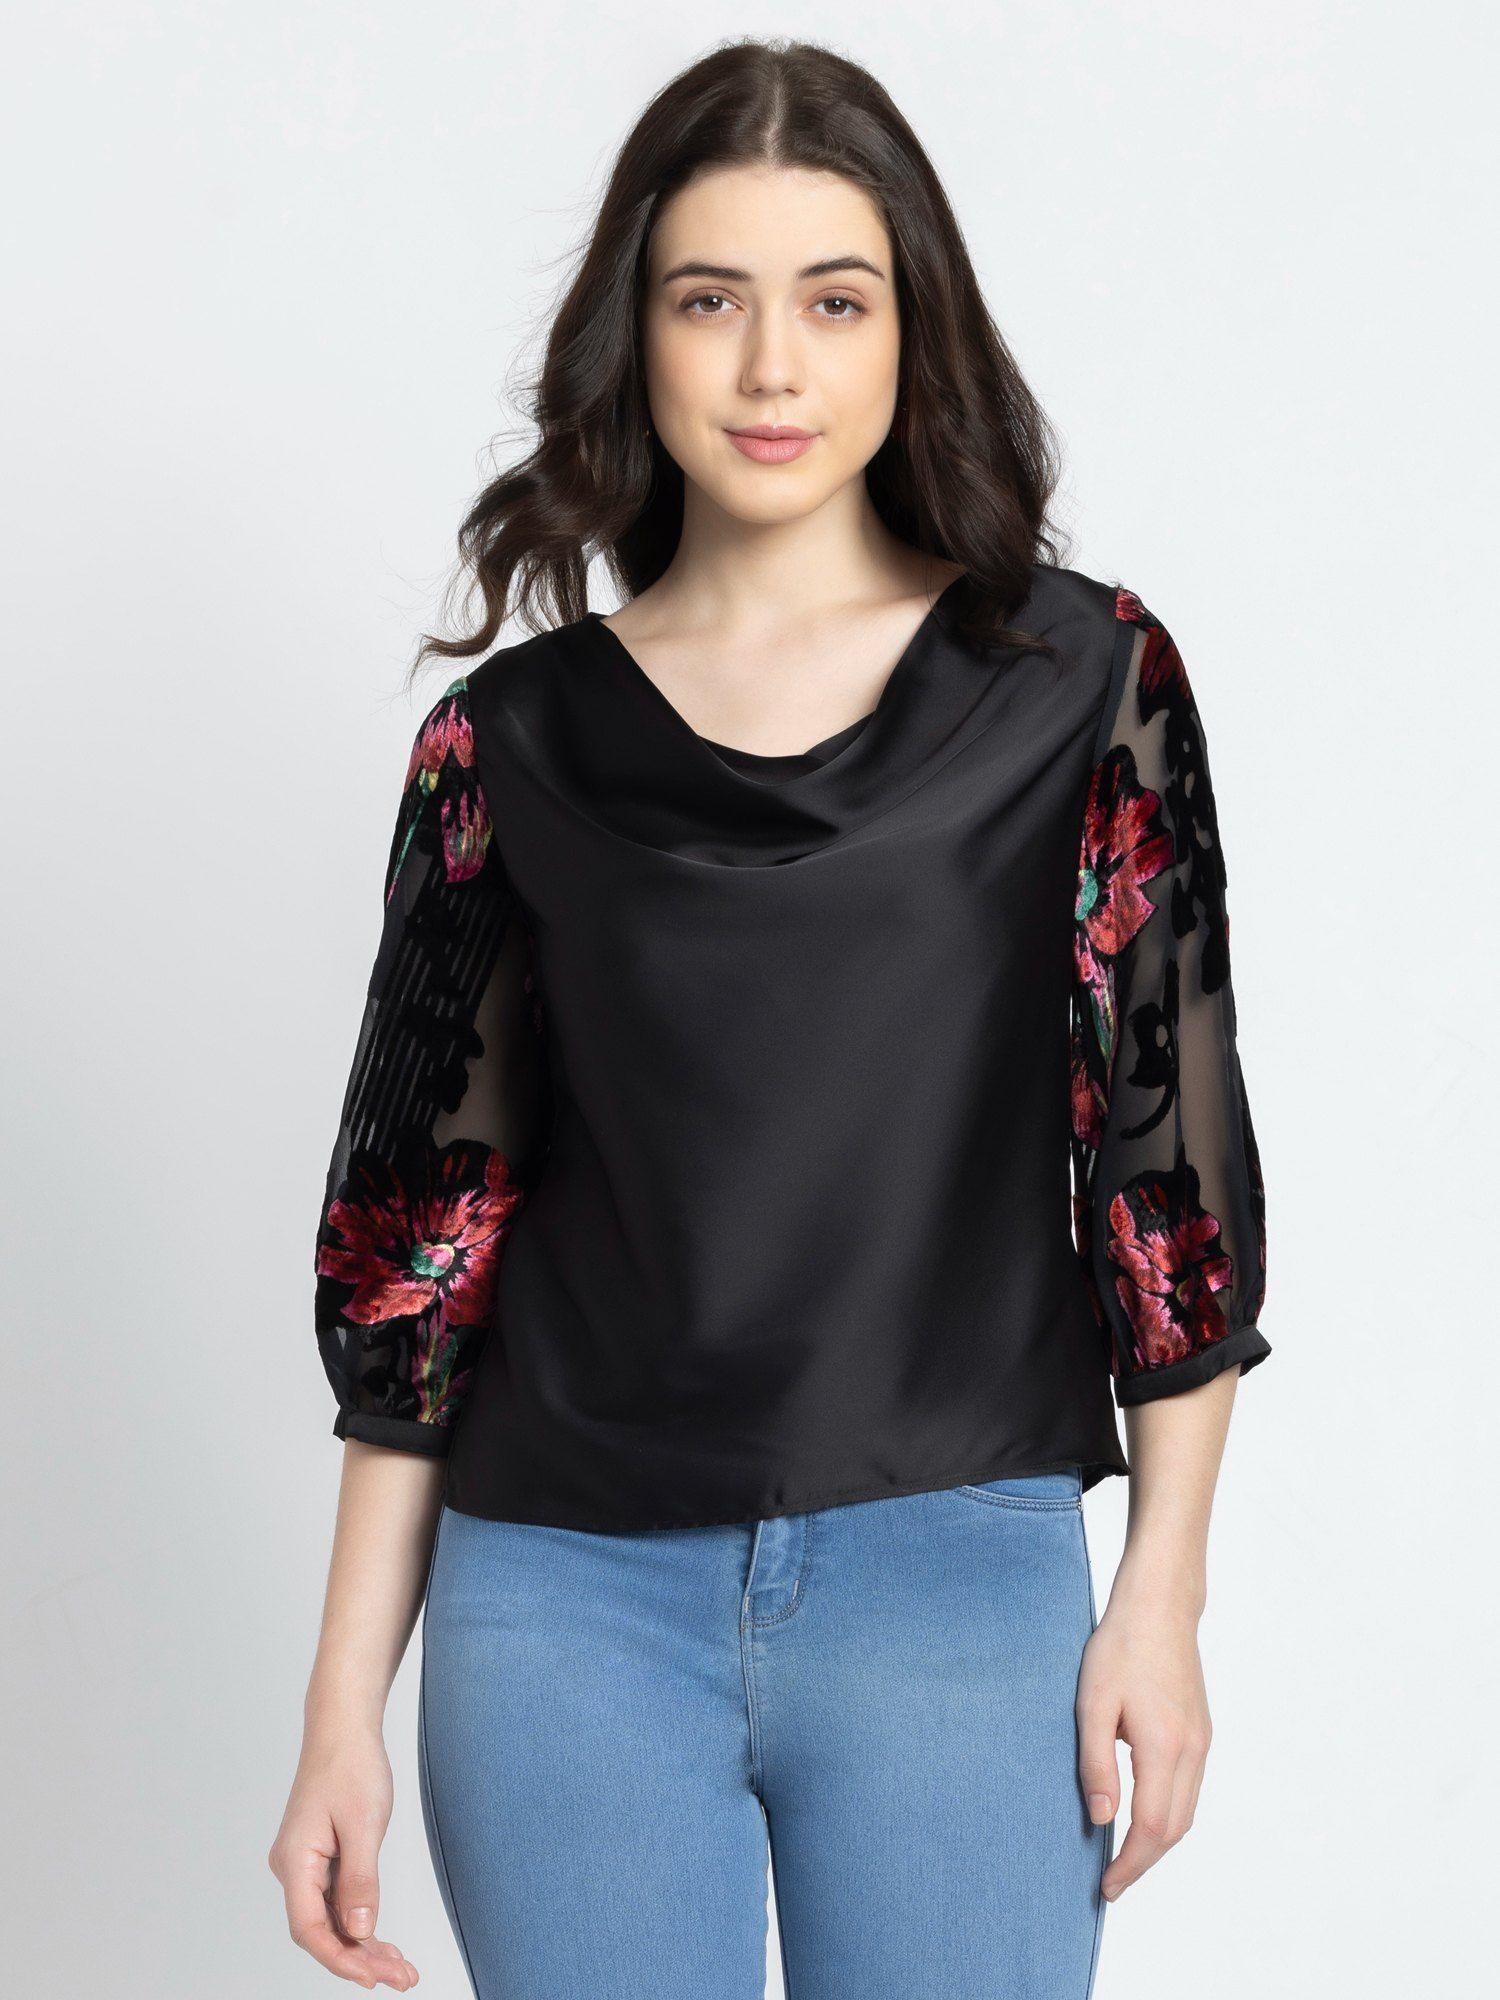 cowl neck black solid three fourth sleeves party tops for women